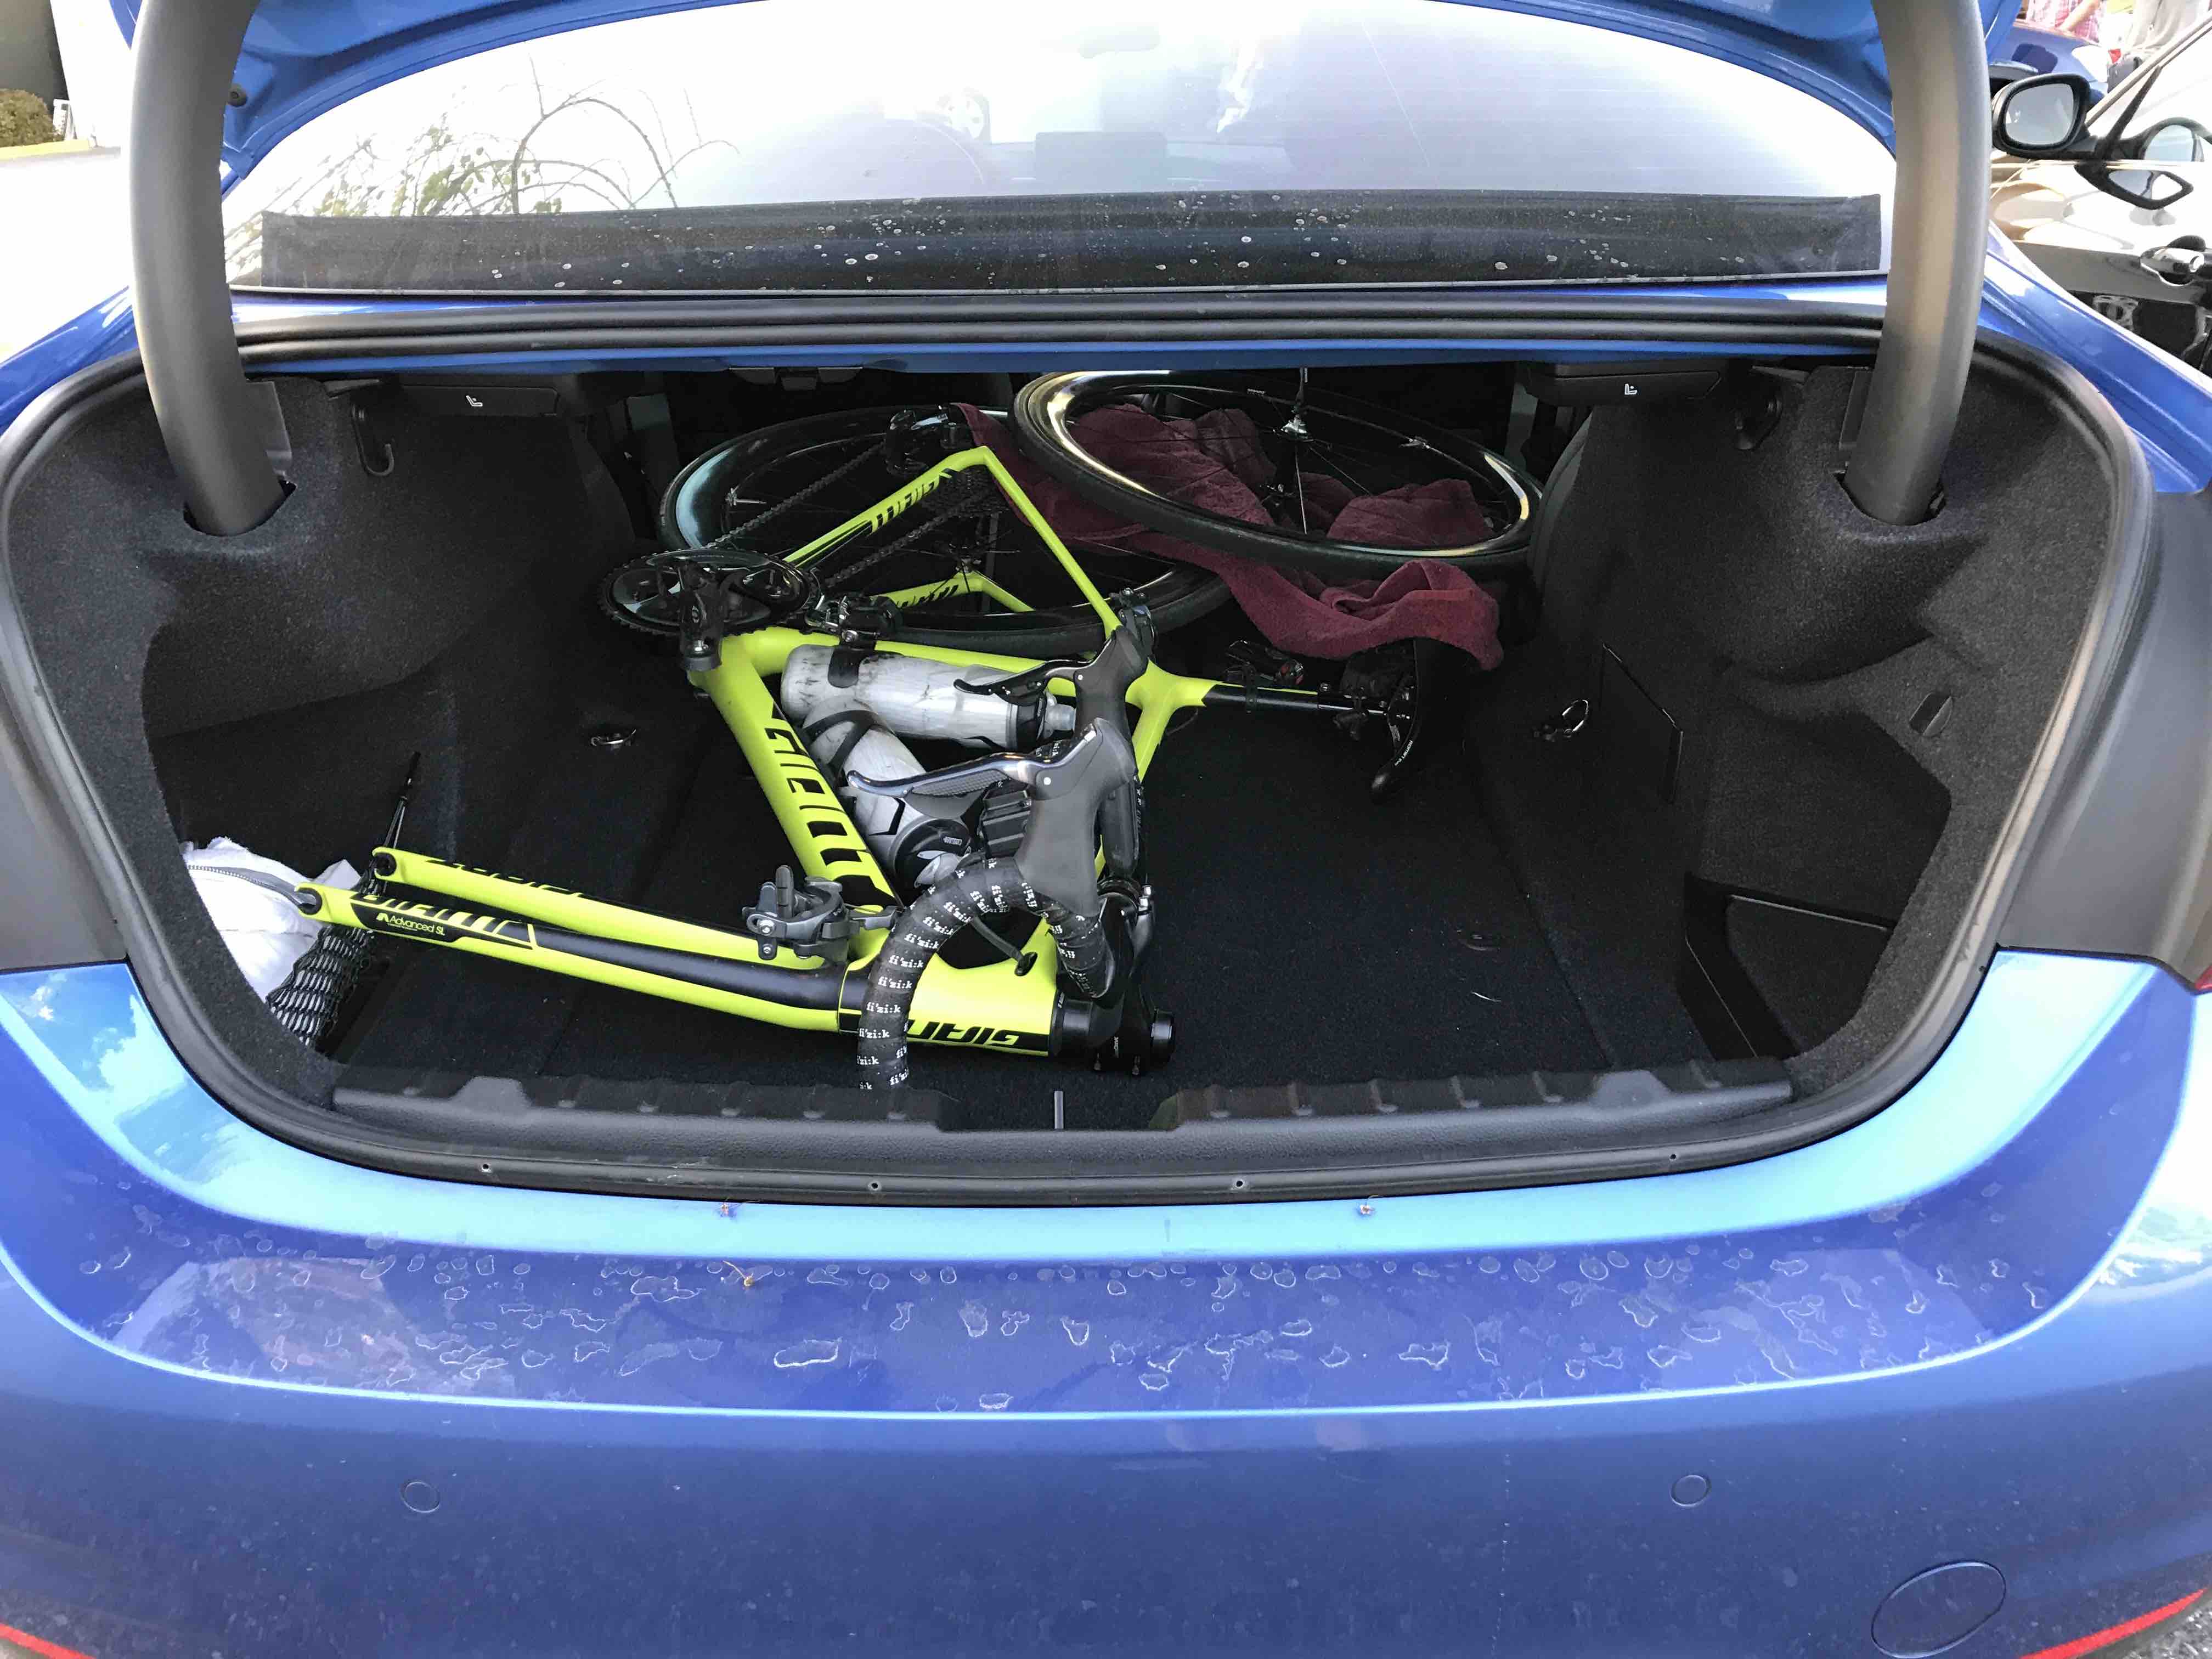 Bike fits when placed in trunk of sedan with seats folded down